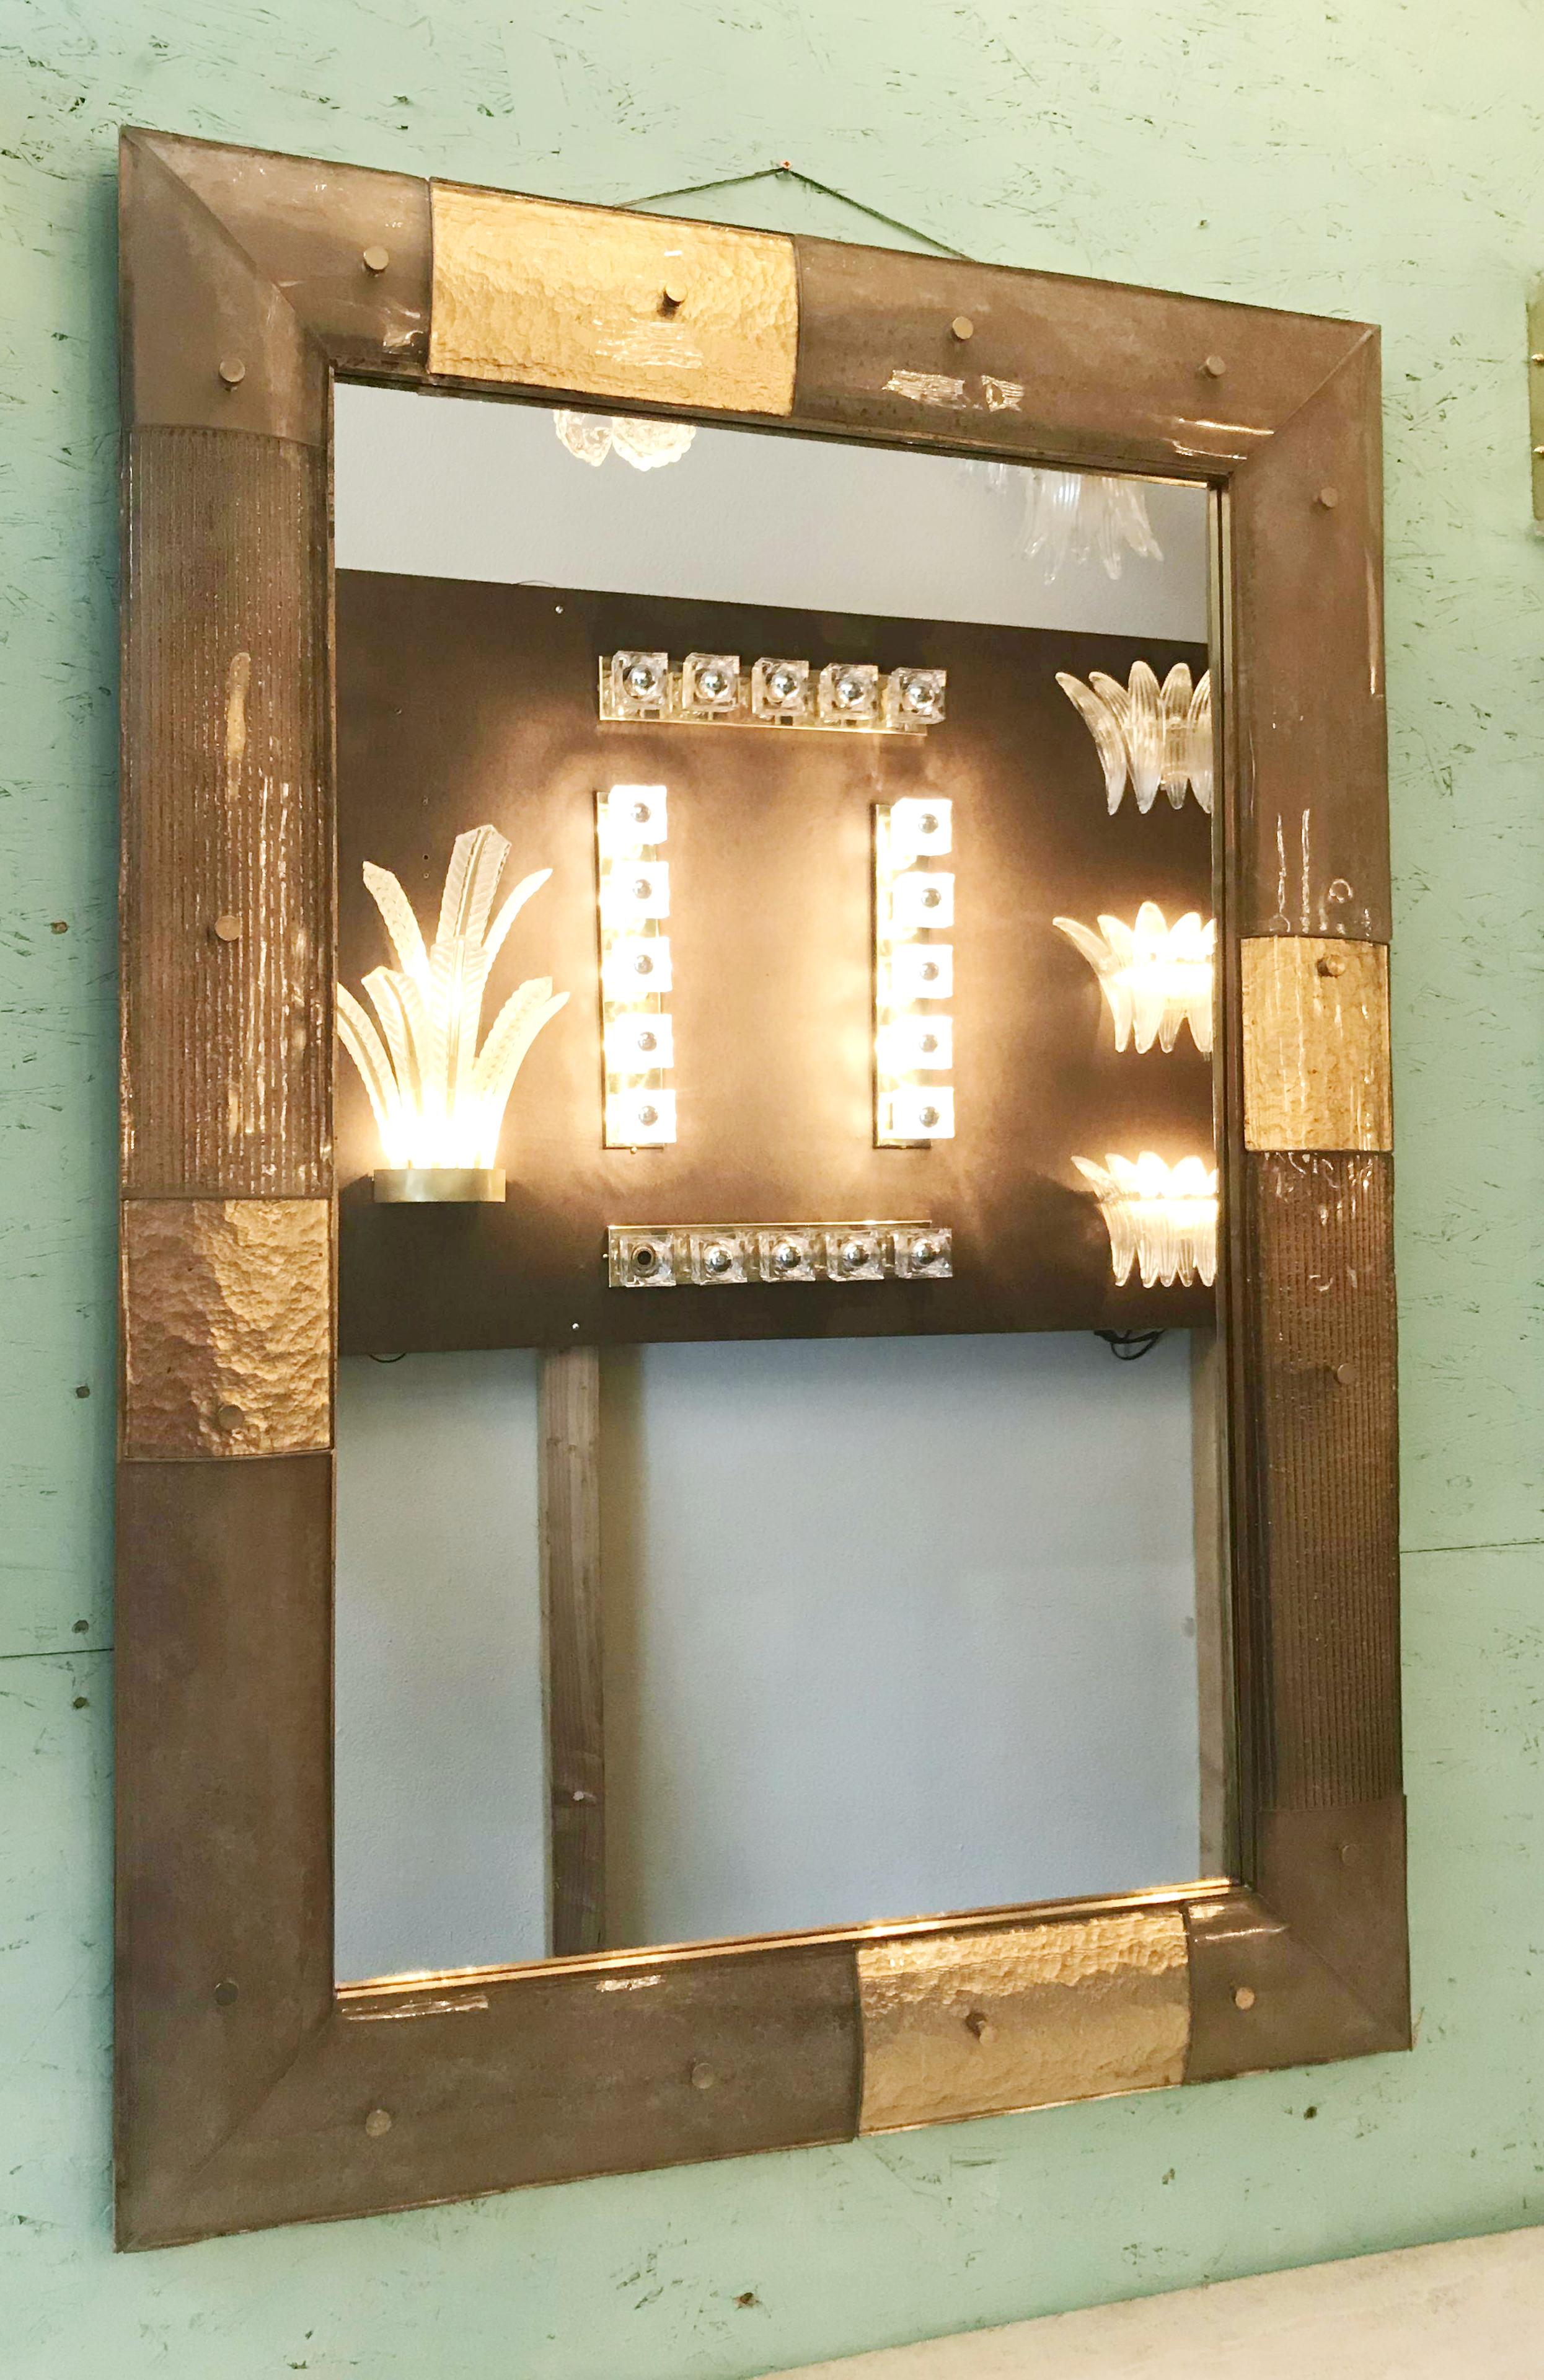 Italian rectangular mirror made of Murano glass and brass details by Fabio Bergomi for Fabio Ltd. Each glass is hand finished with different effects: gold leaf, ribbed and frosted.
Depth: 1.5 inches / Width: 34.5 inches / Height: 48.5 inches
Order